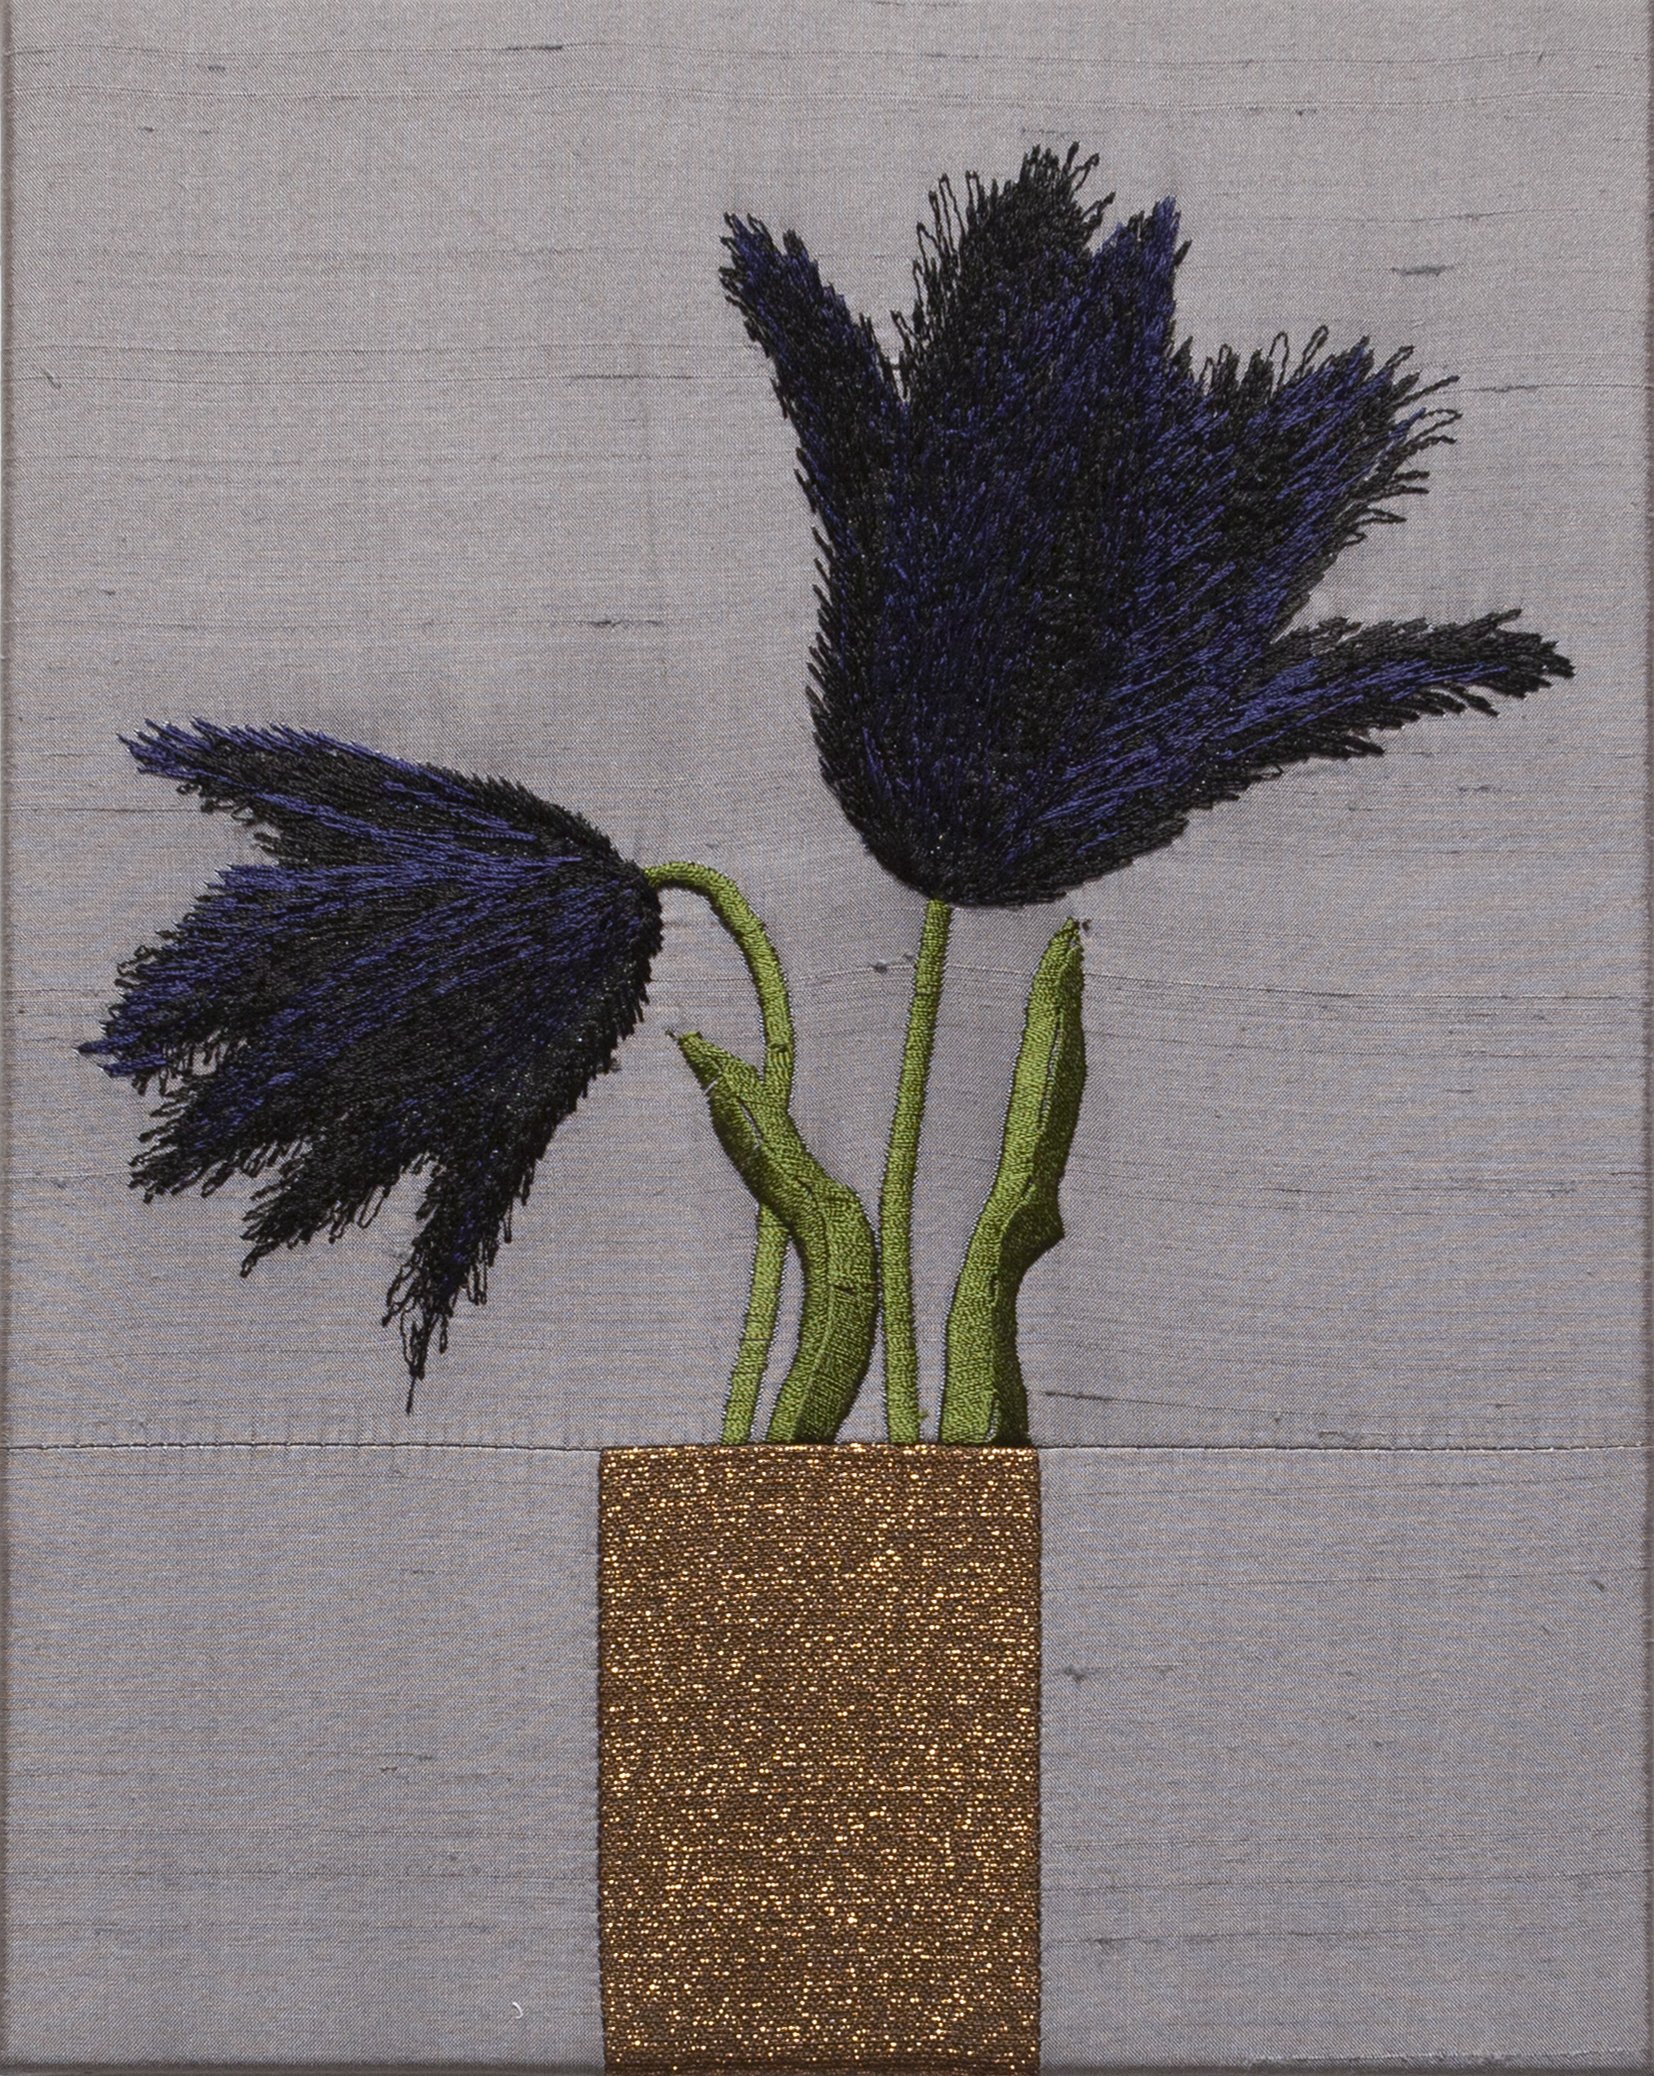  Angelo Filomeno,  A Vase of Tulips , 2021 Embroidery on silk shantung stretched over cotton | 10 x 8 inches | HG15983 